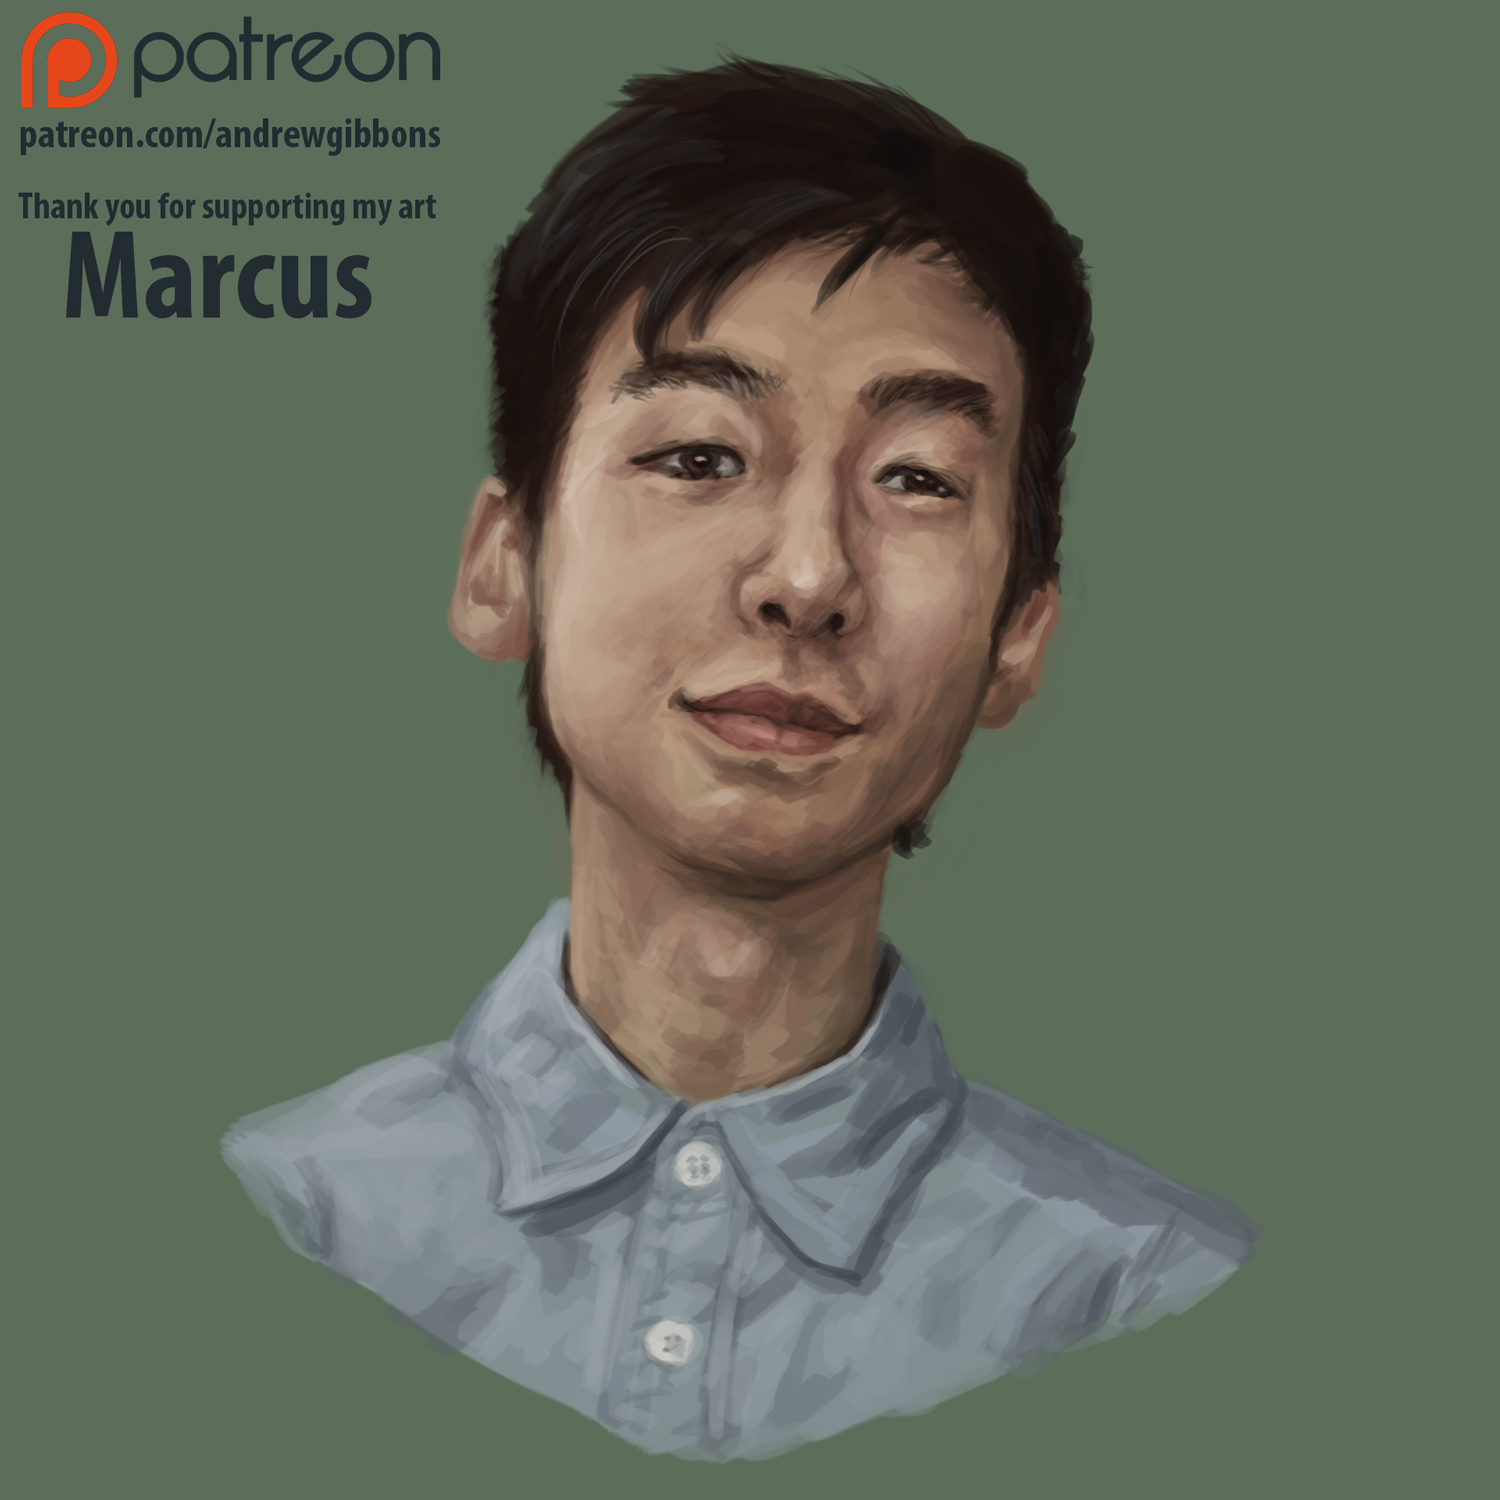 [Image: patron_portrait___marcus_by_andrew_gibbons-dbg6wet.jpg]